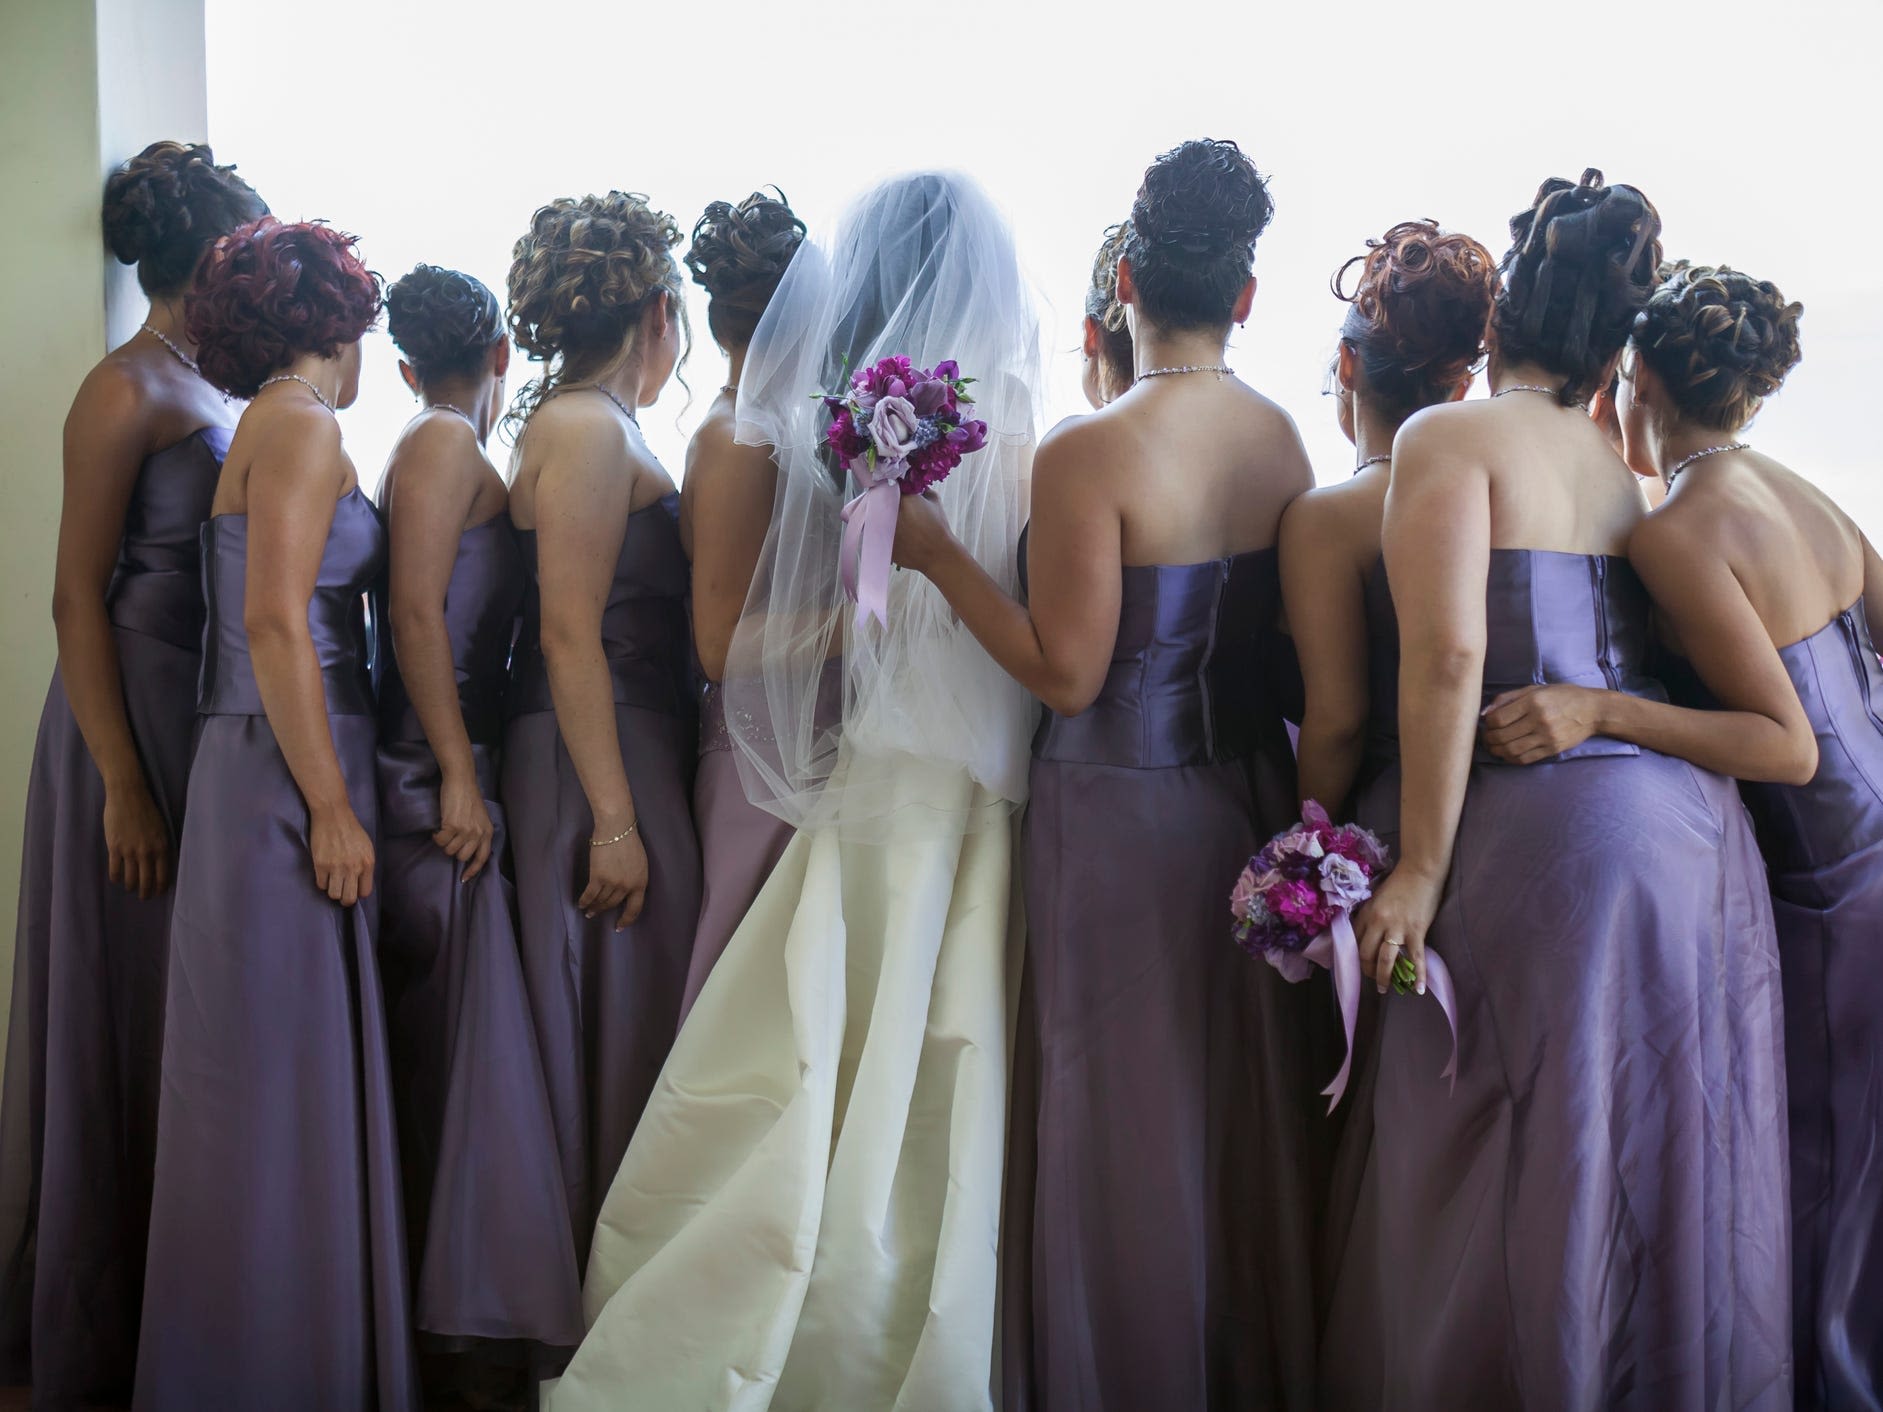 A bridesmaid says she's out $3,200 for the wedding, and if she did everything the bride wanted, she'd probably have to move